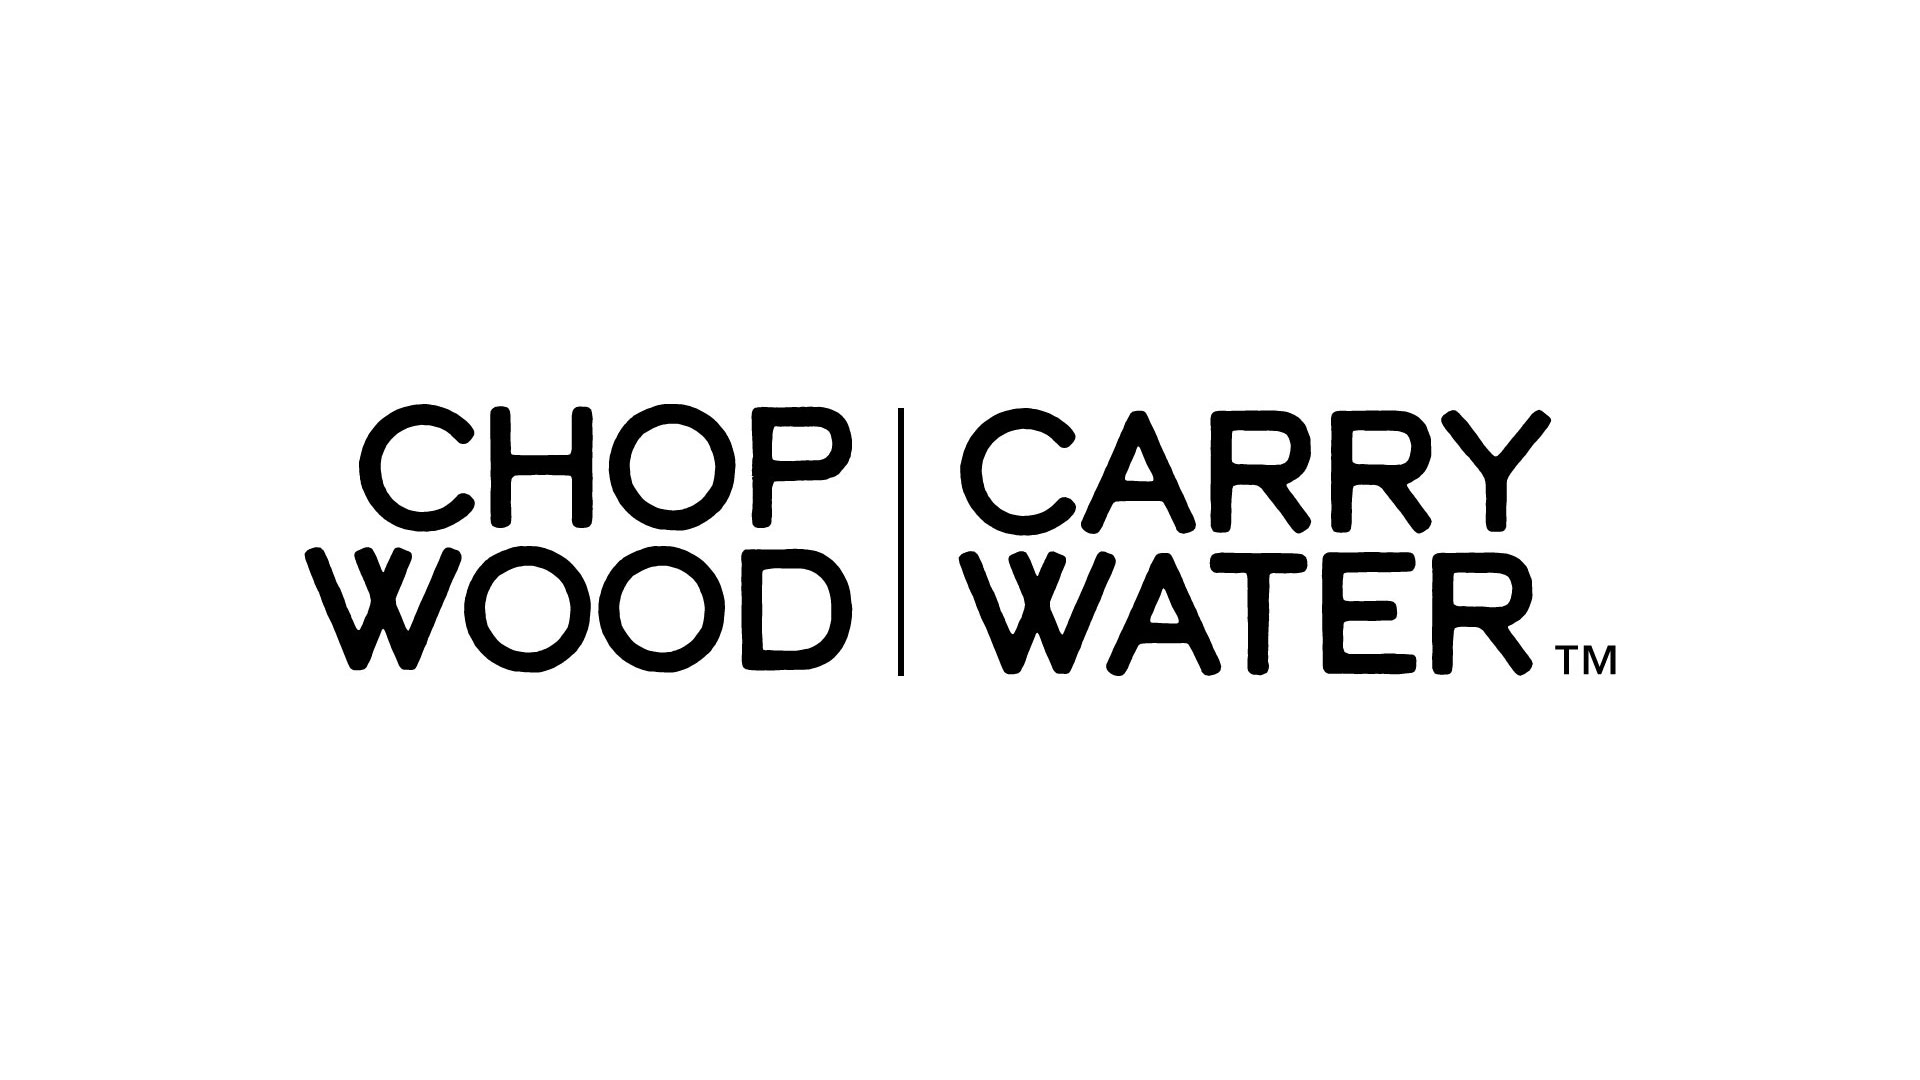 Introducing CHOP WOOD CARRY WATER